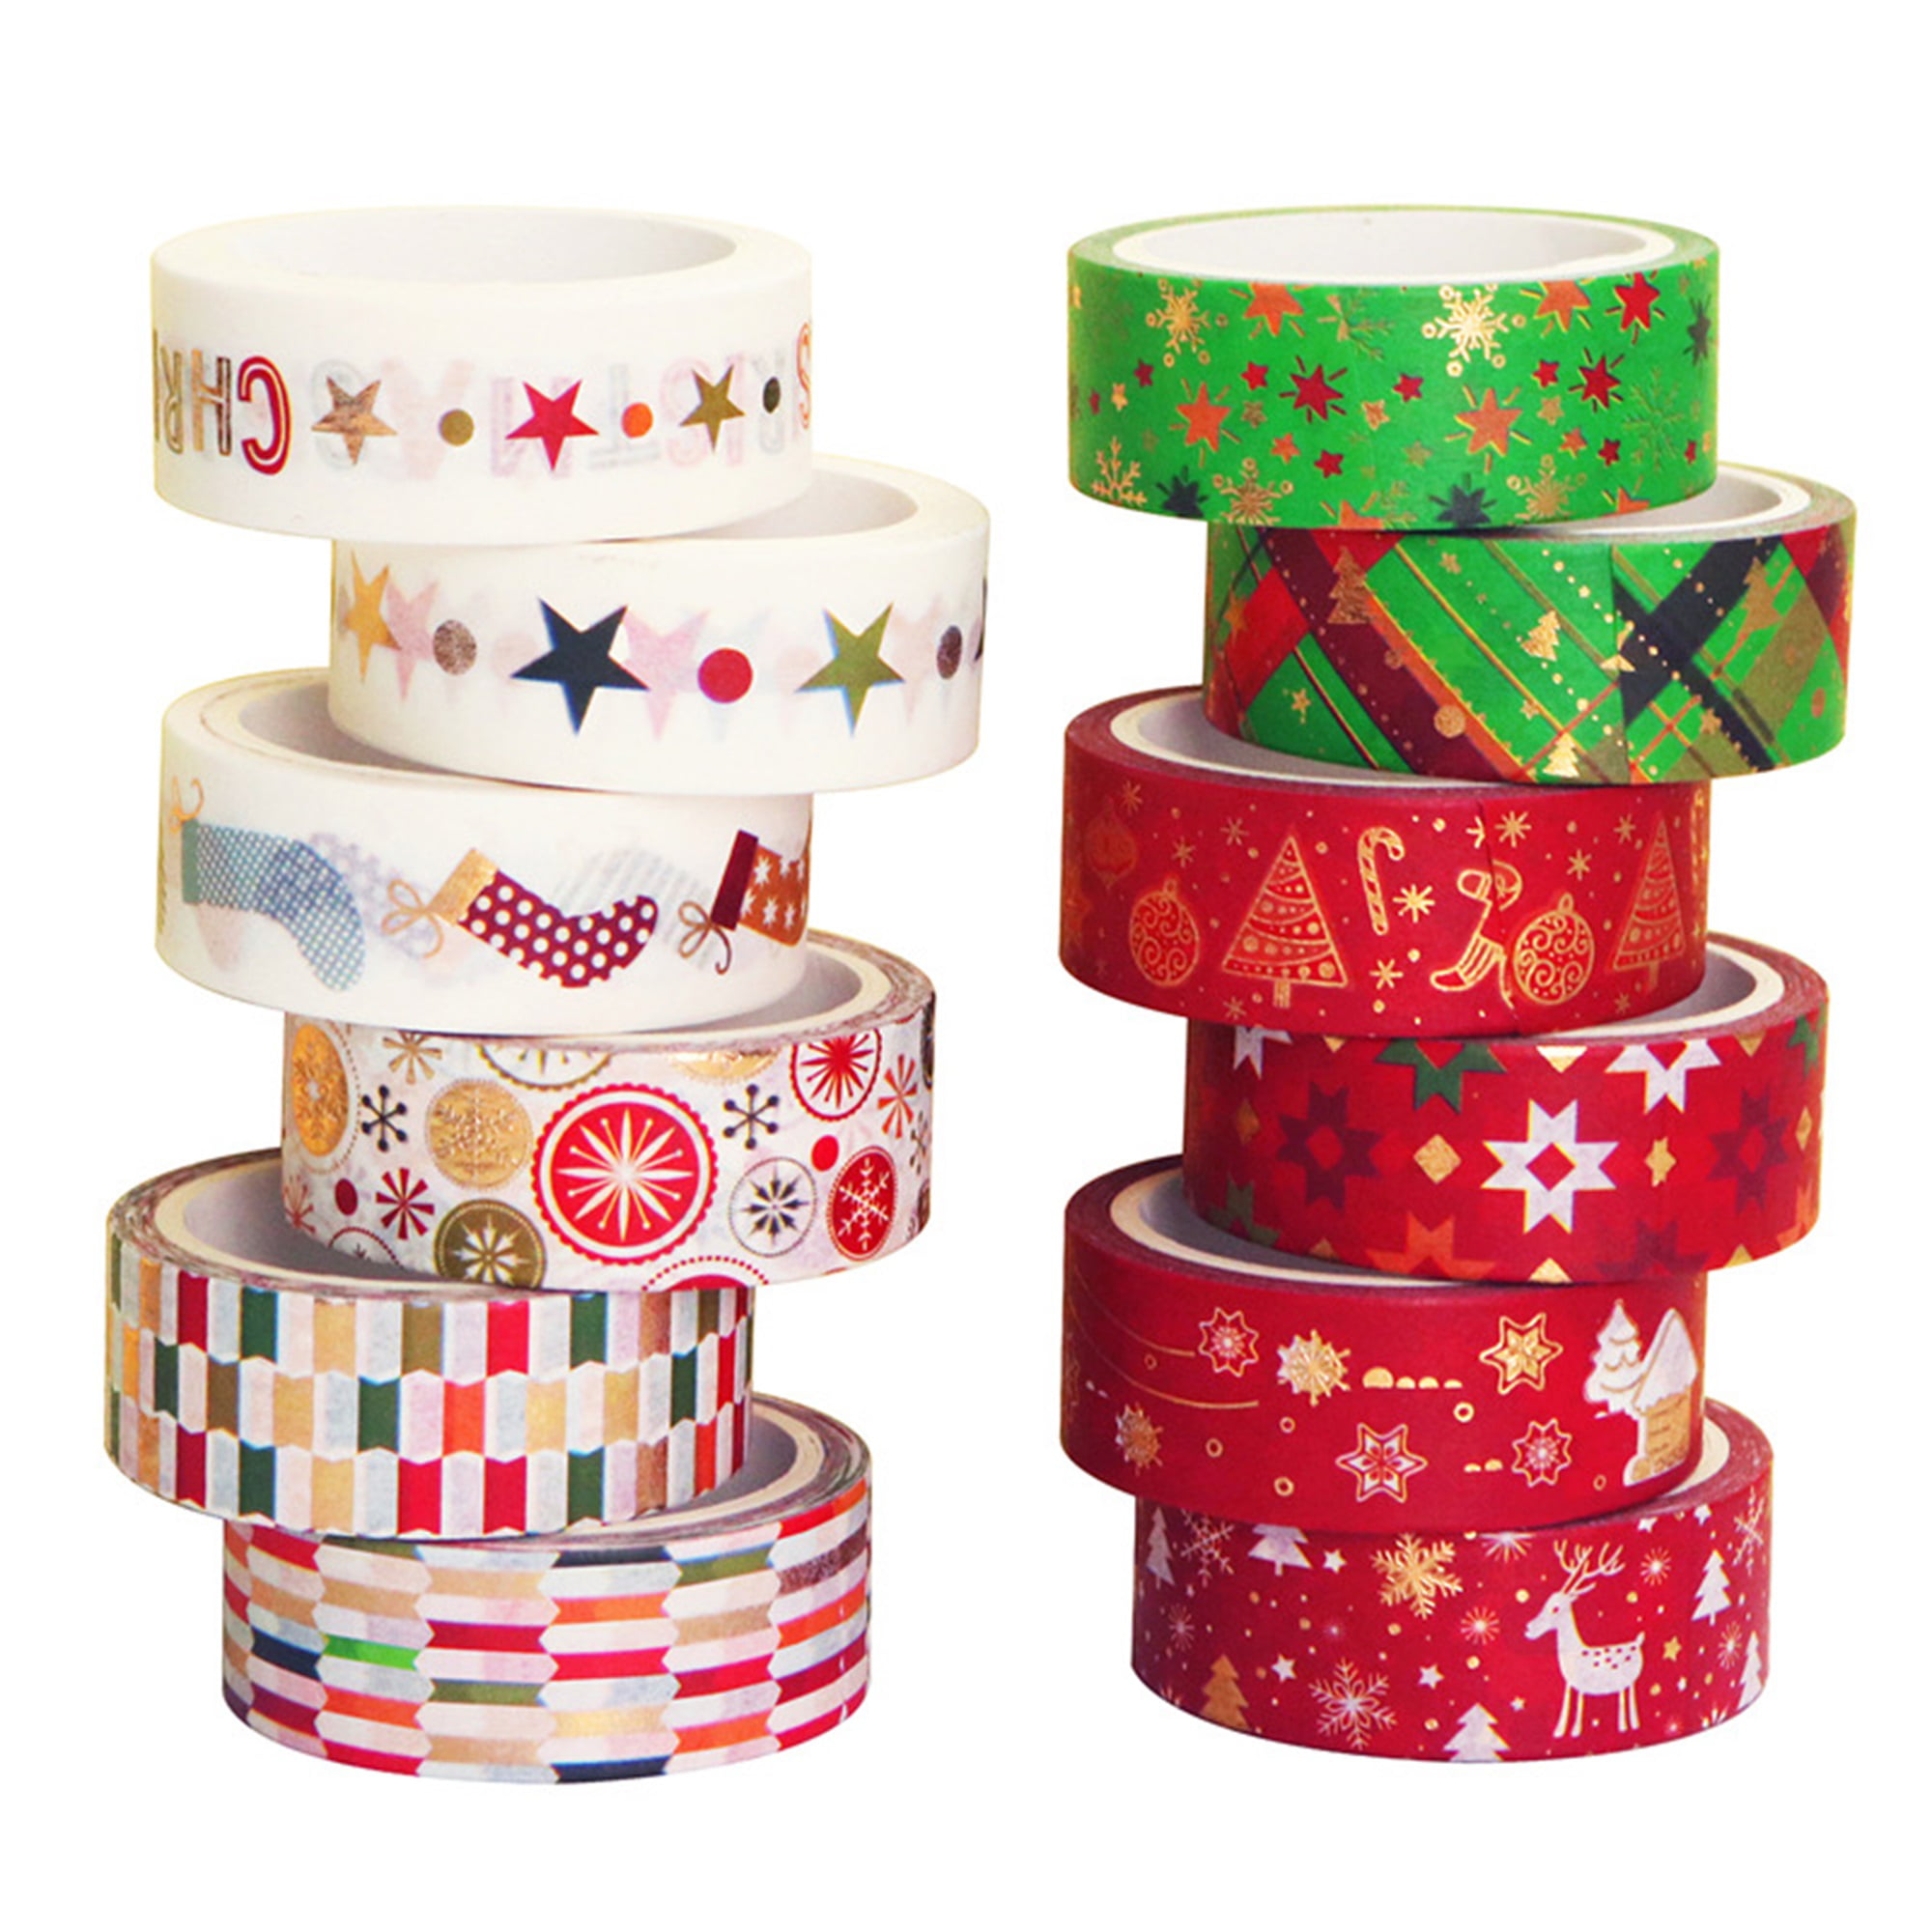 10 Rolls Christmas Washi Masking Tape Set,5m Merry Christmas Designs Collection for Xmas Wall Tree DIY,Holiday Christmas Party Favors Craft Supplies Red